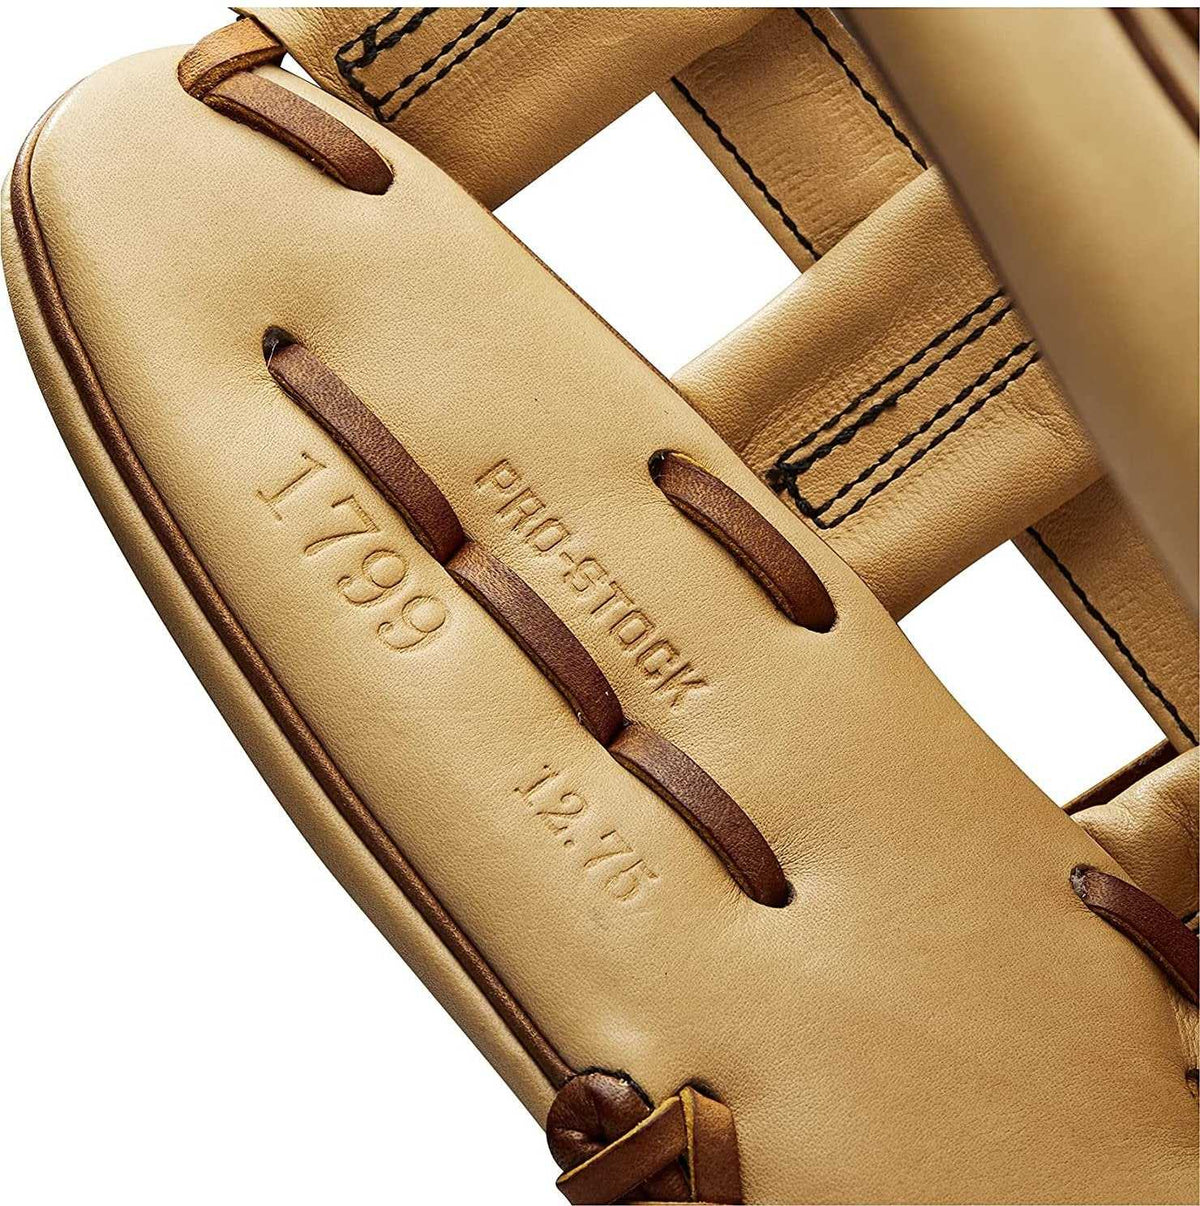 Wilson A2000 1799 12.75&quot; Outfield Glove WBW1003951275 - Blonde Saddle Tan - HIT a Double